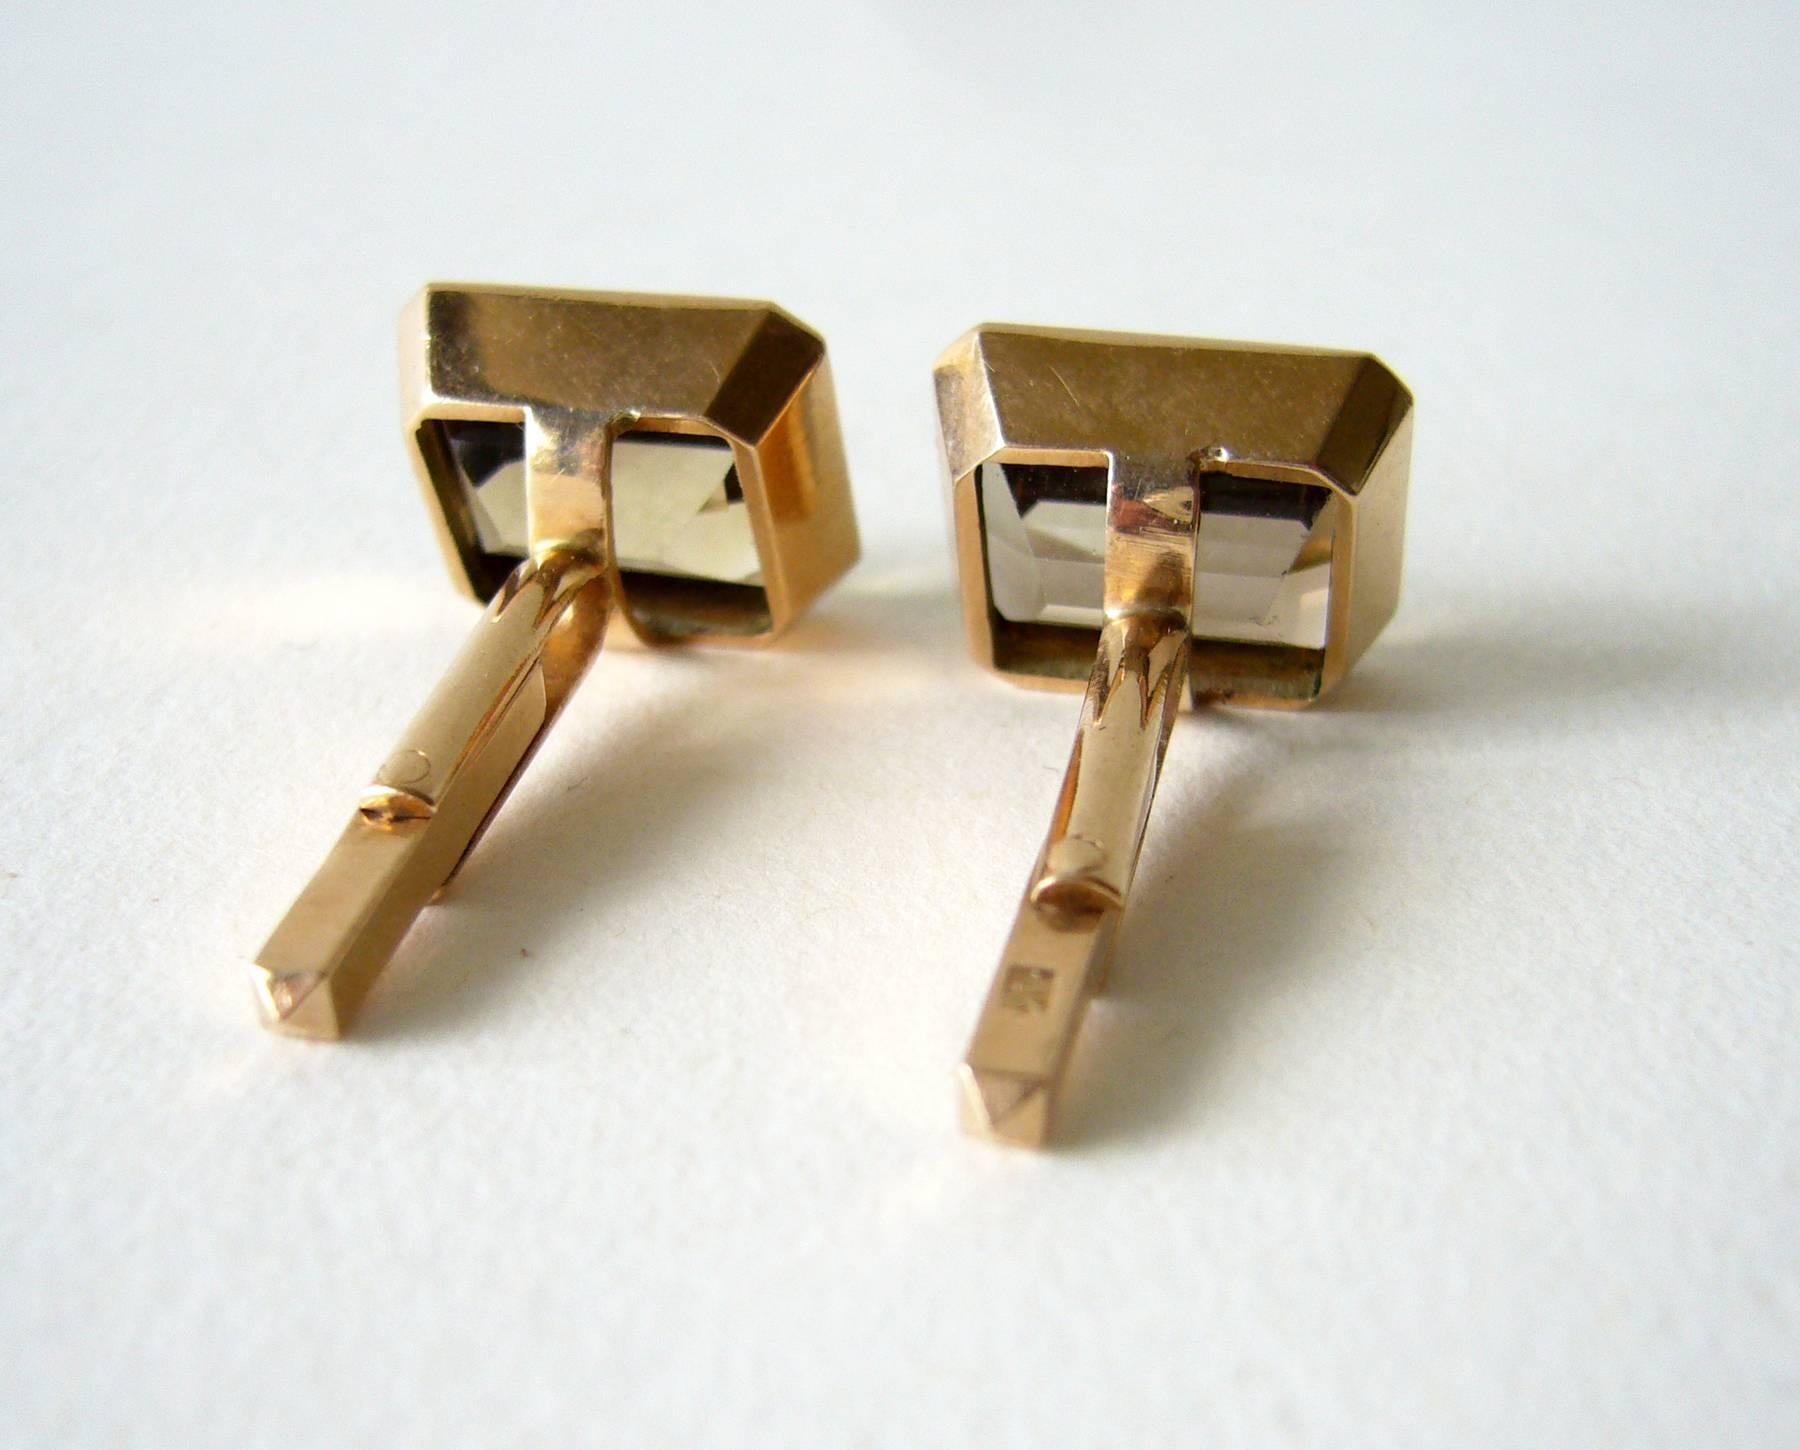 Pair of 14k rose gold and faceted smokey quartz cufflinks circa 1960's.  Cufflinks measure .75" by .50".  Signed 14k on findings and in very good vintage condition.   